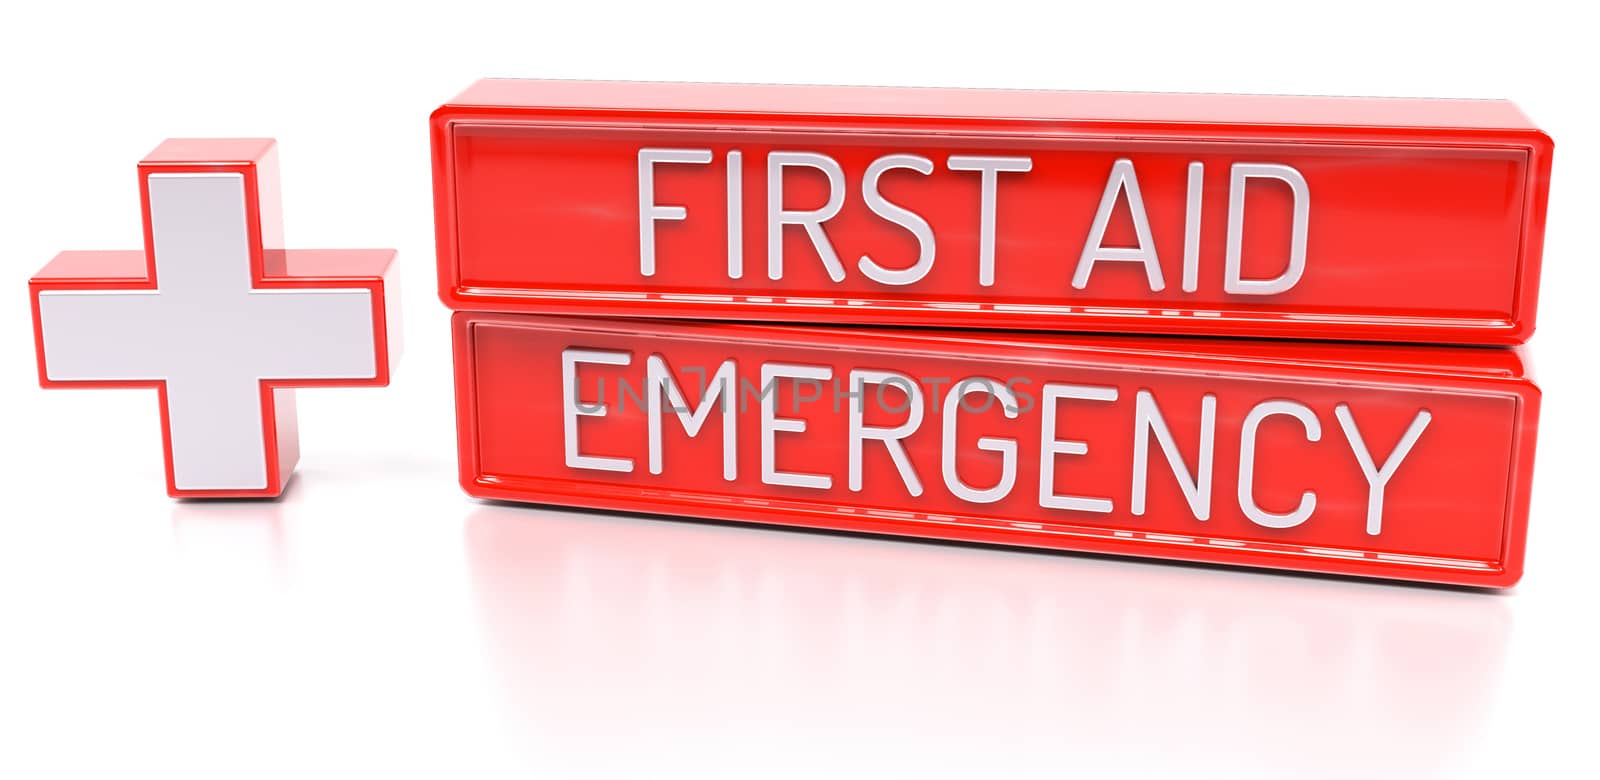 First aid, Emergency - 3d banner, isolated on white background